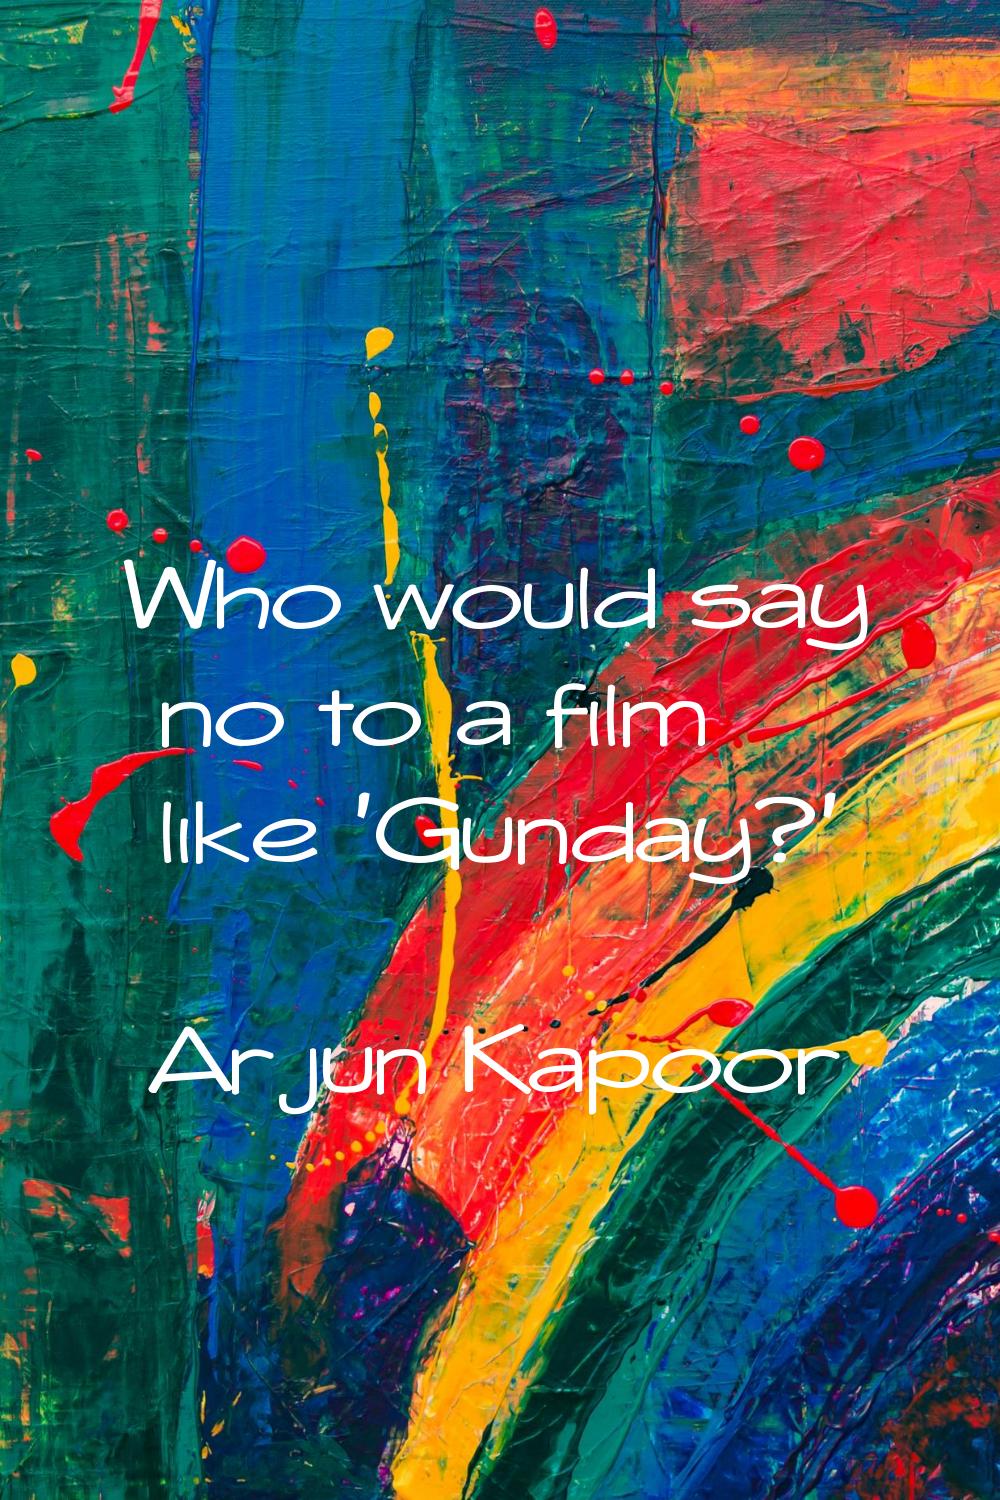 Who would say no to a film like 'Gunday?'